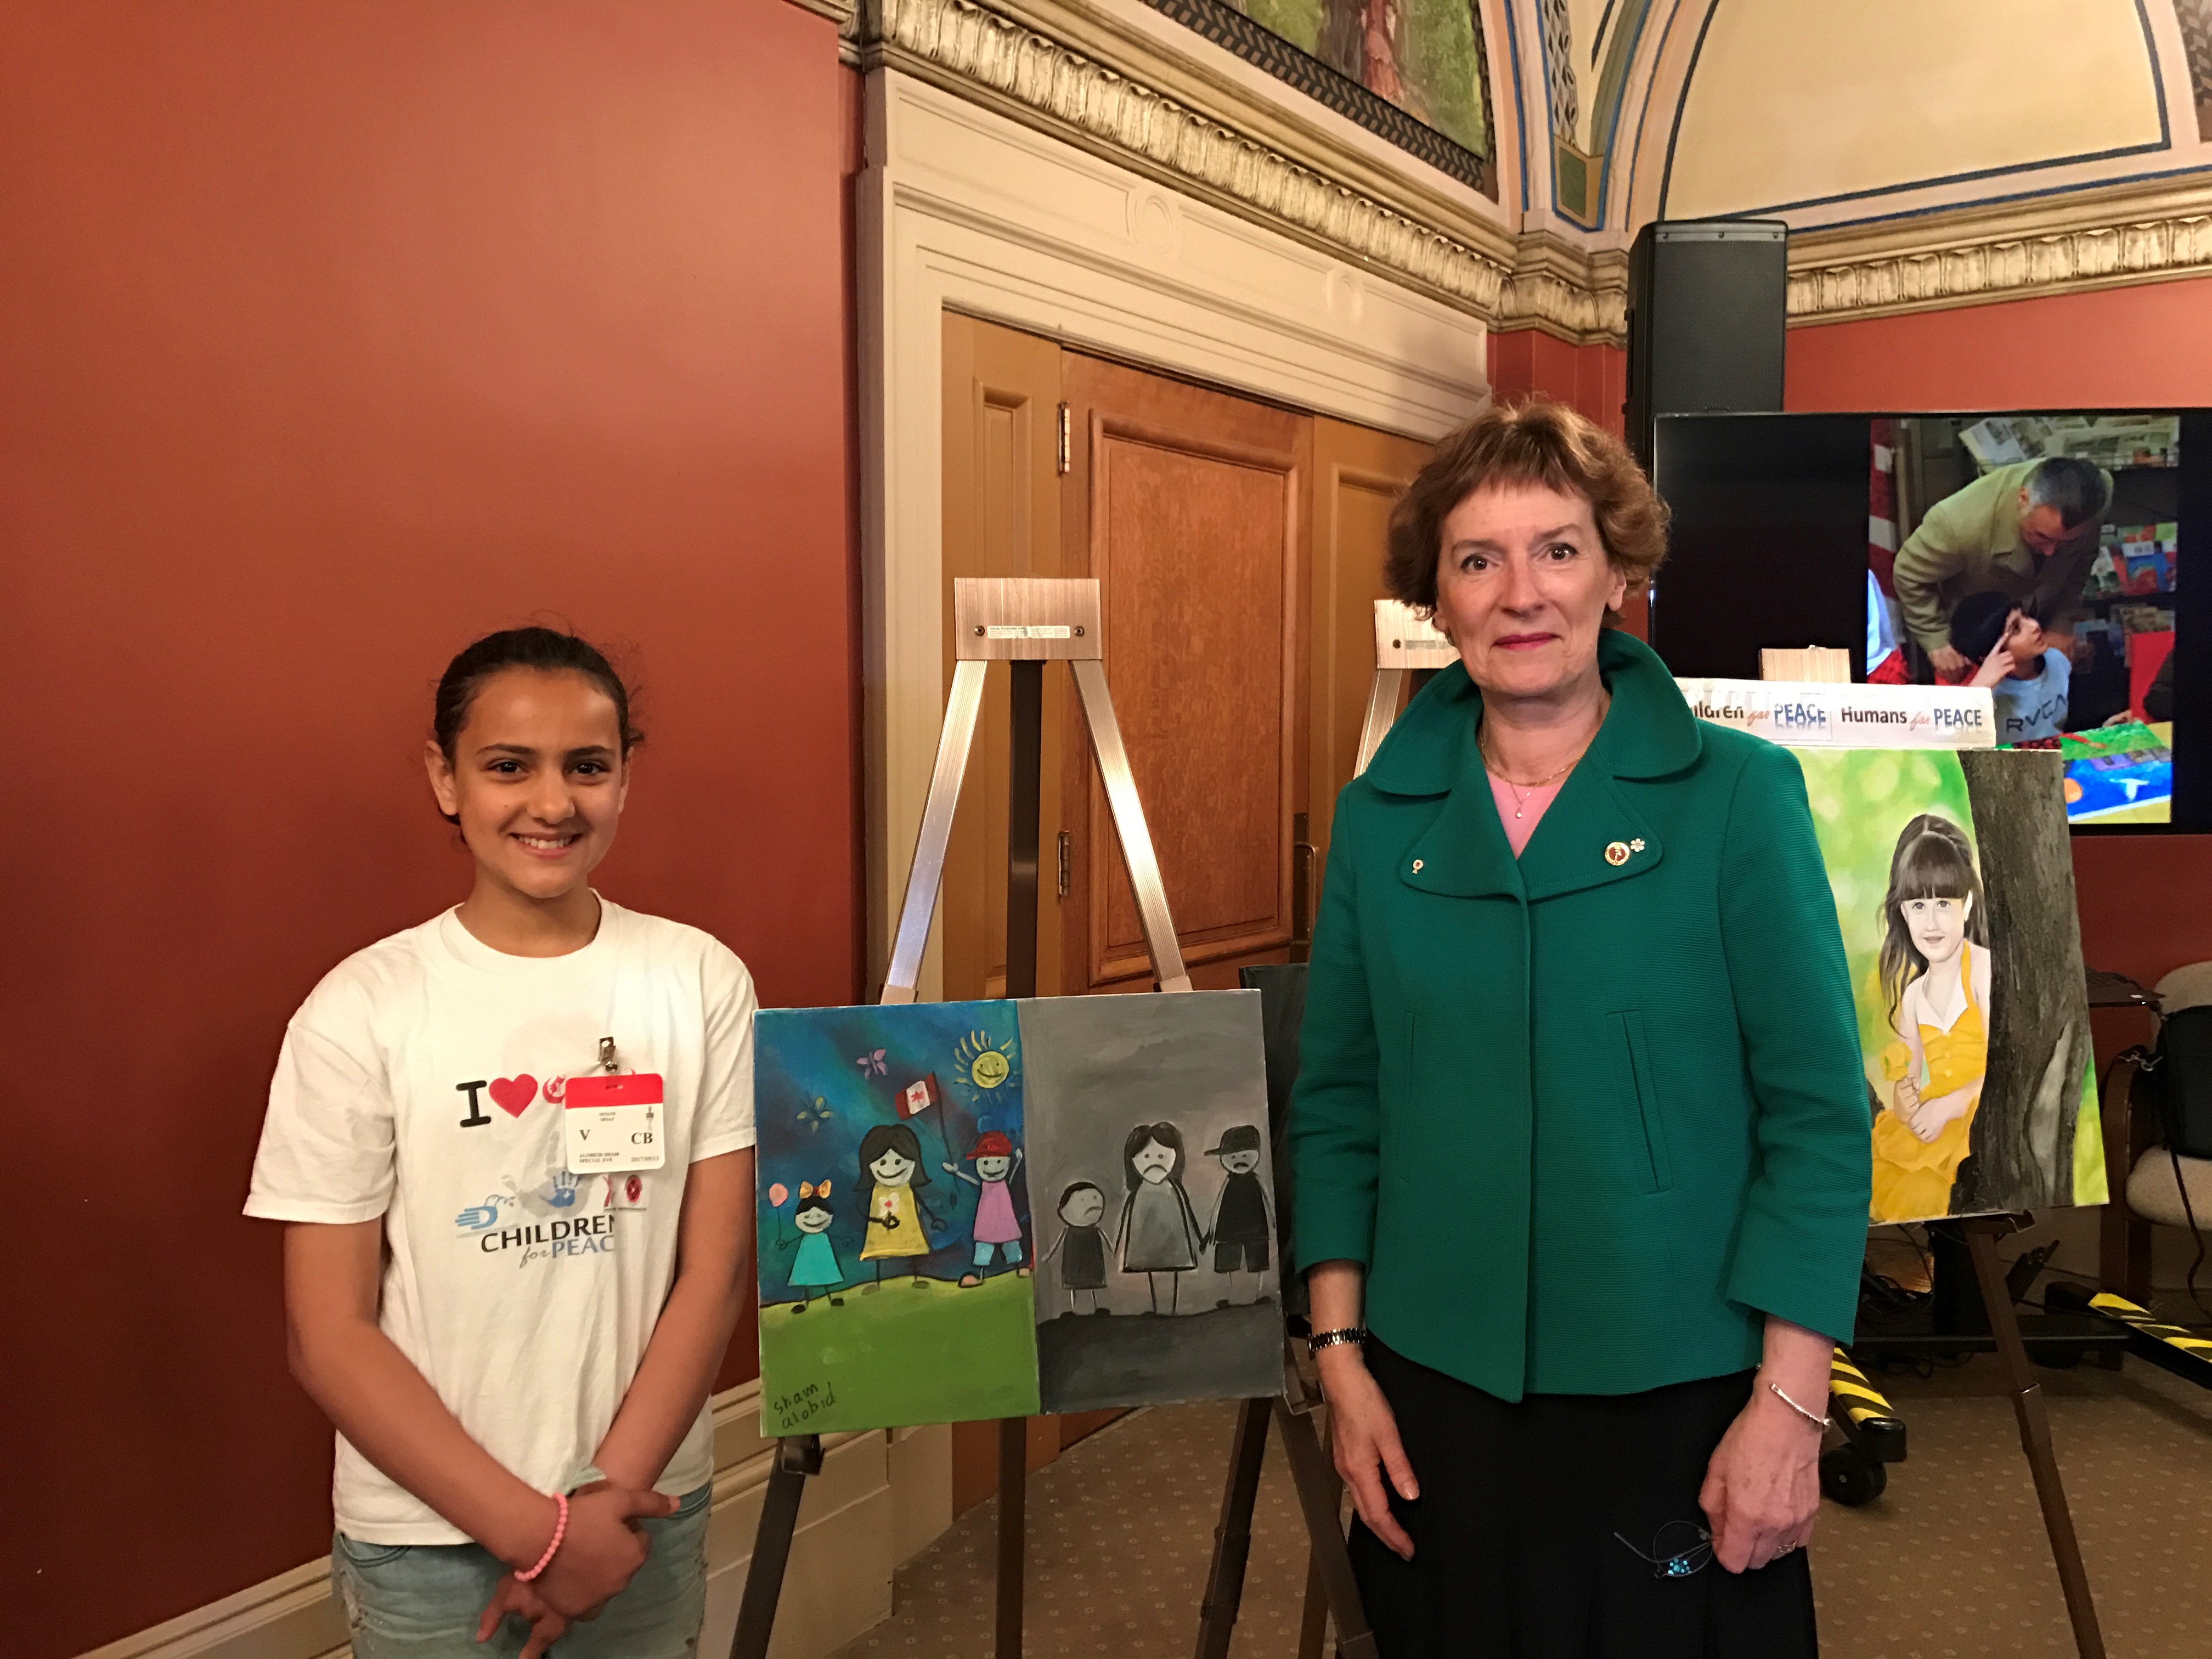 Senator Dupuis takes part in Children For Peace, a program that brought more than a dozen Syrian refugee children to Parliament Hill to display paintings inspired by their experiences in May 2017.